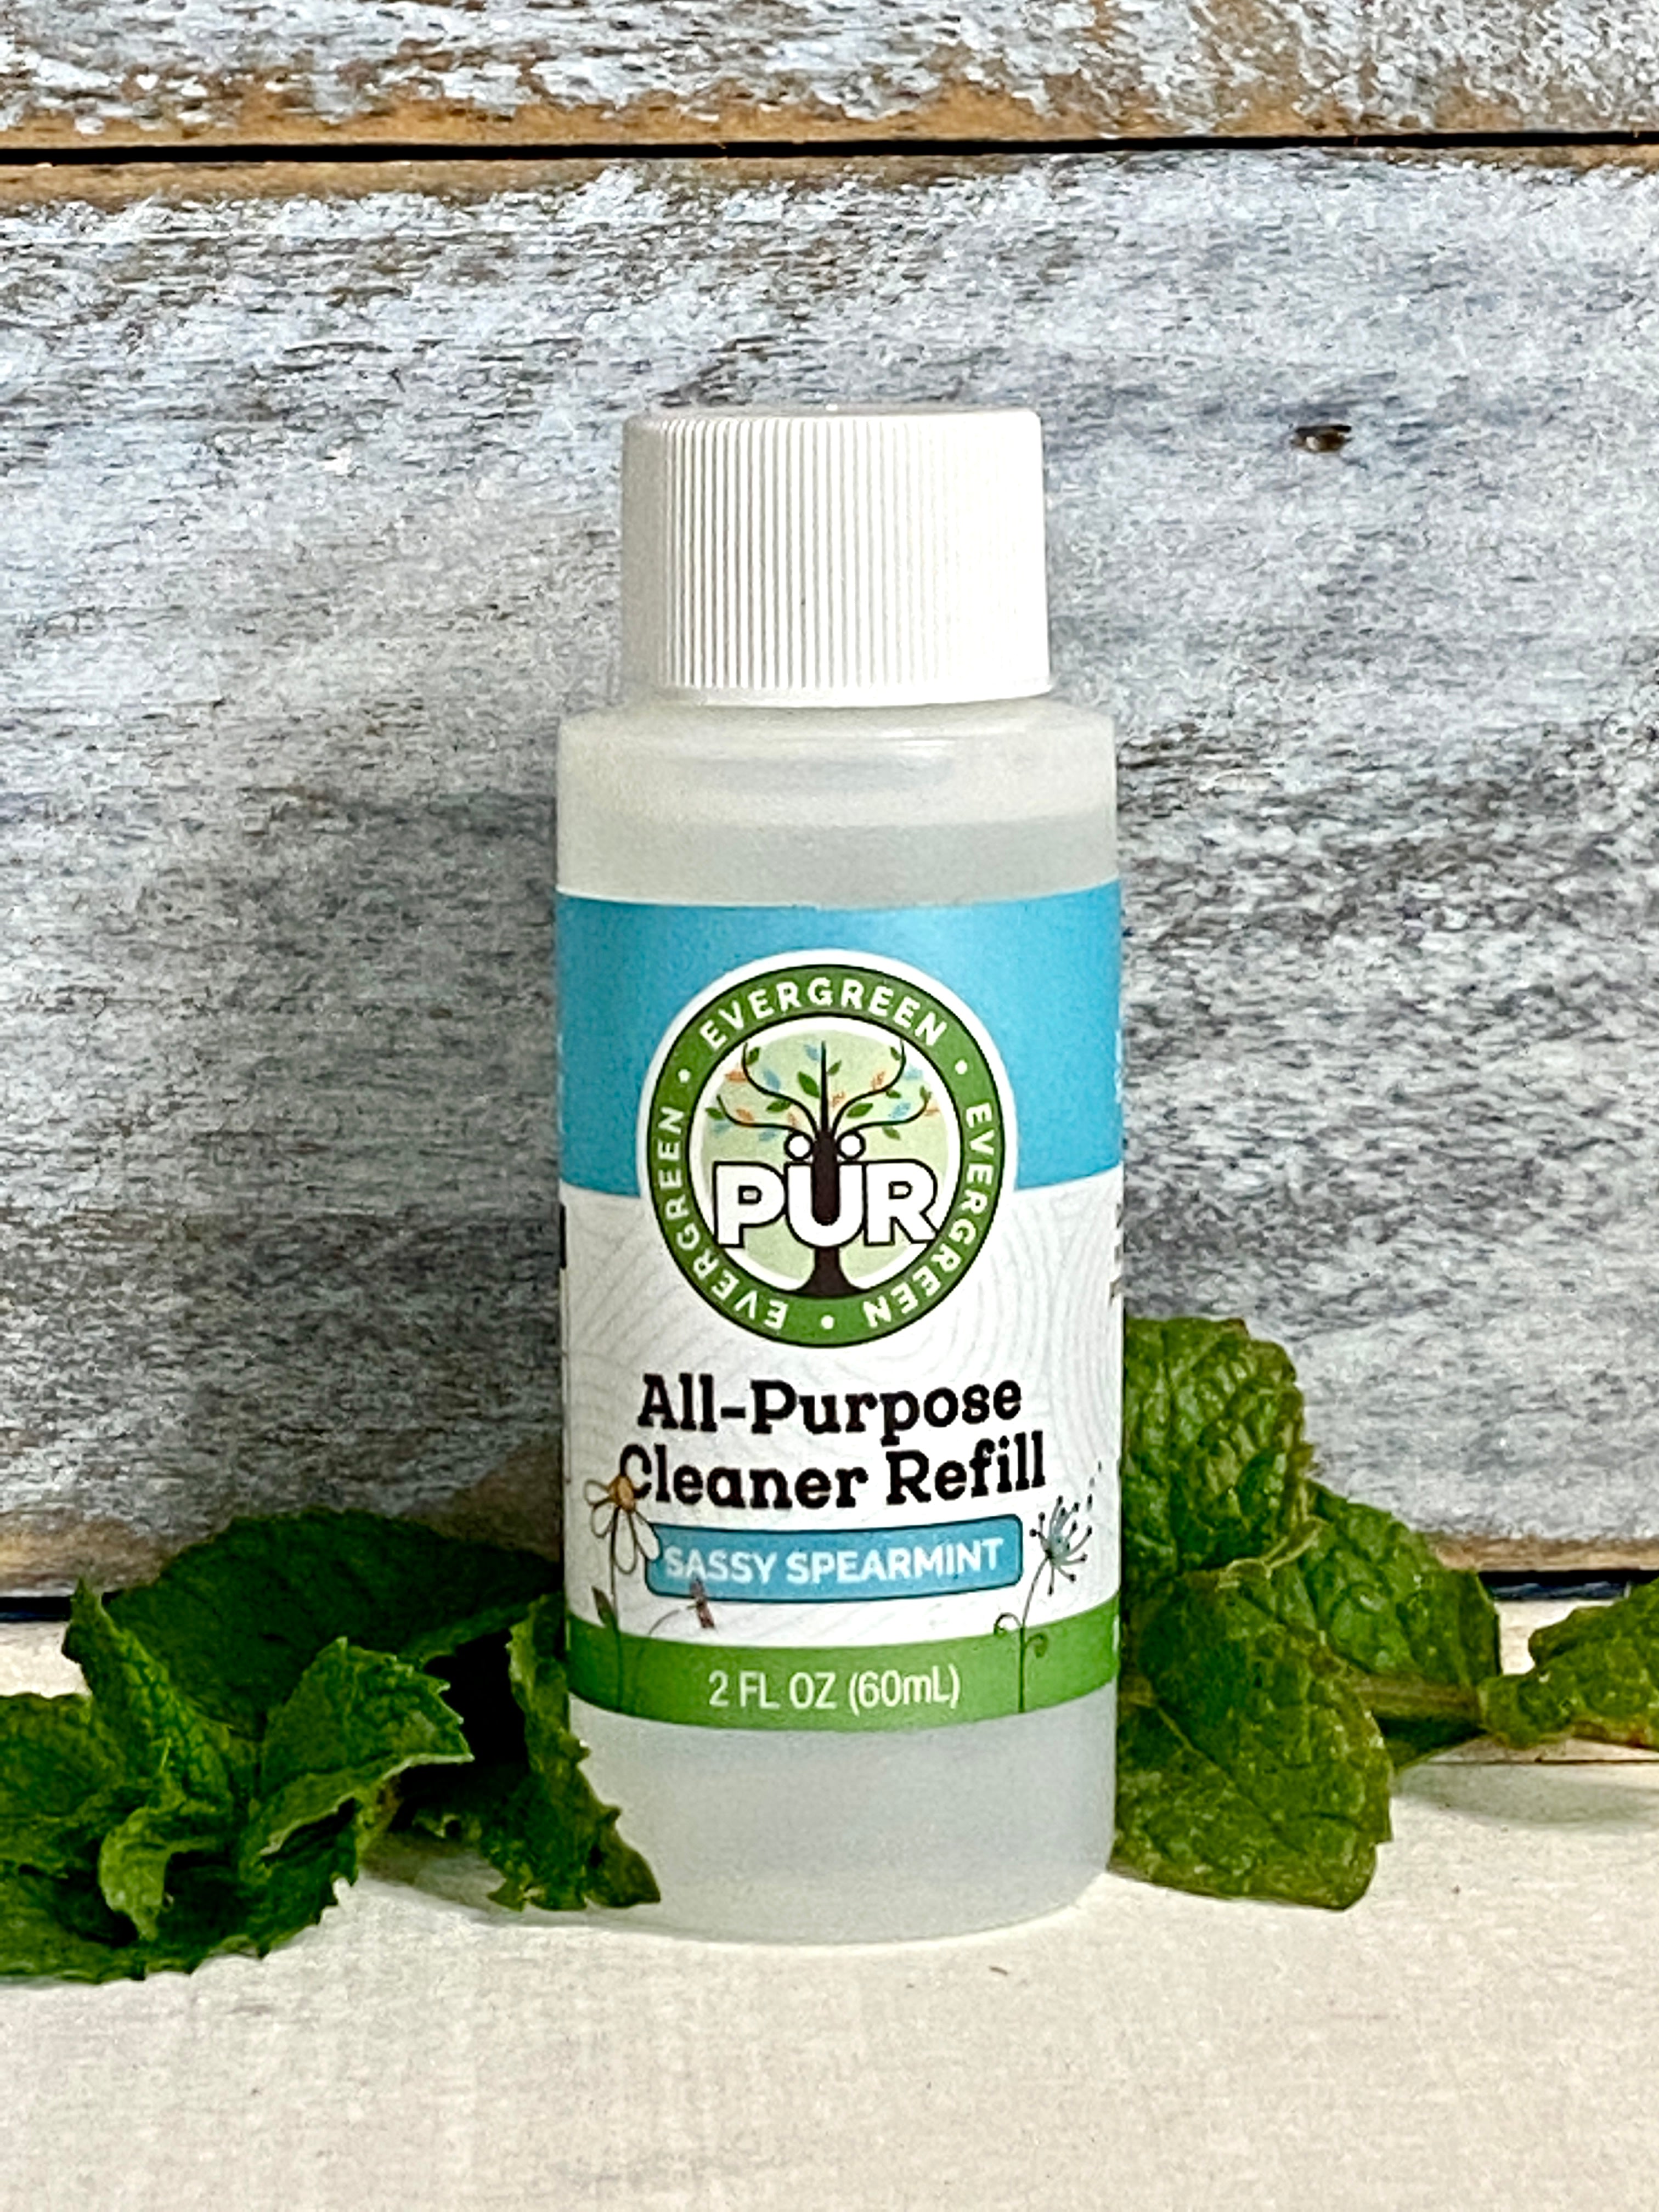 Clean + All Purpose Foam Cleaner Mint Smell 18 oz New